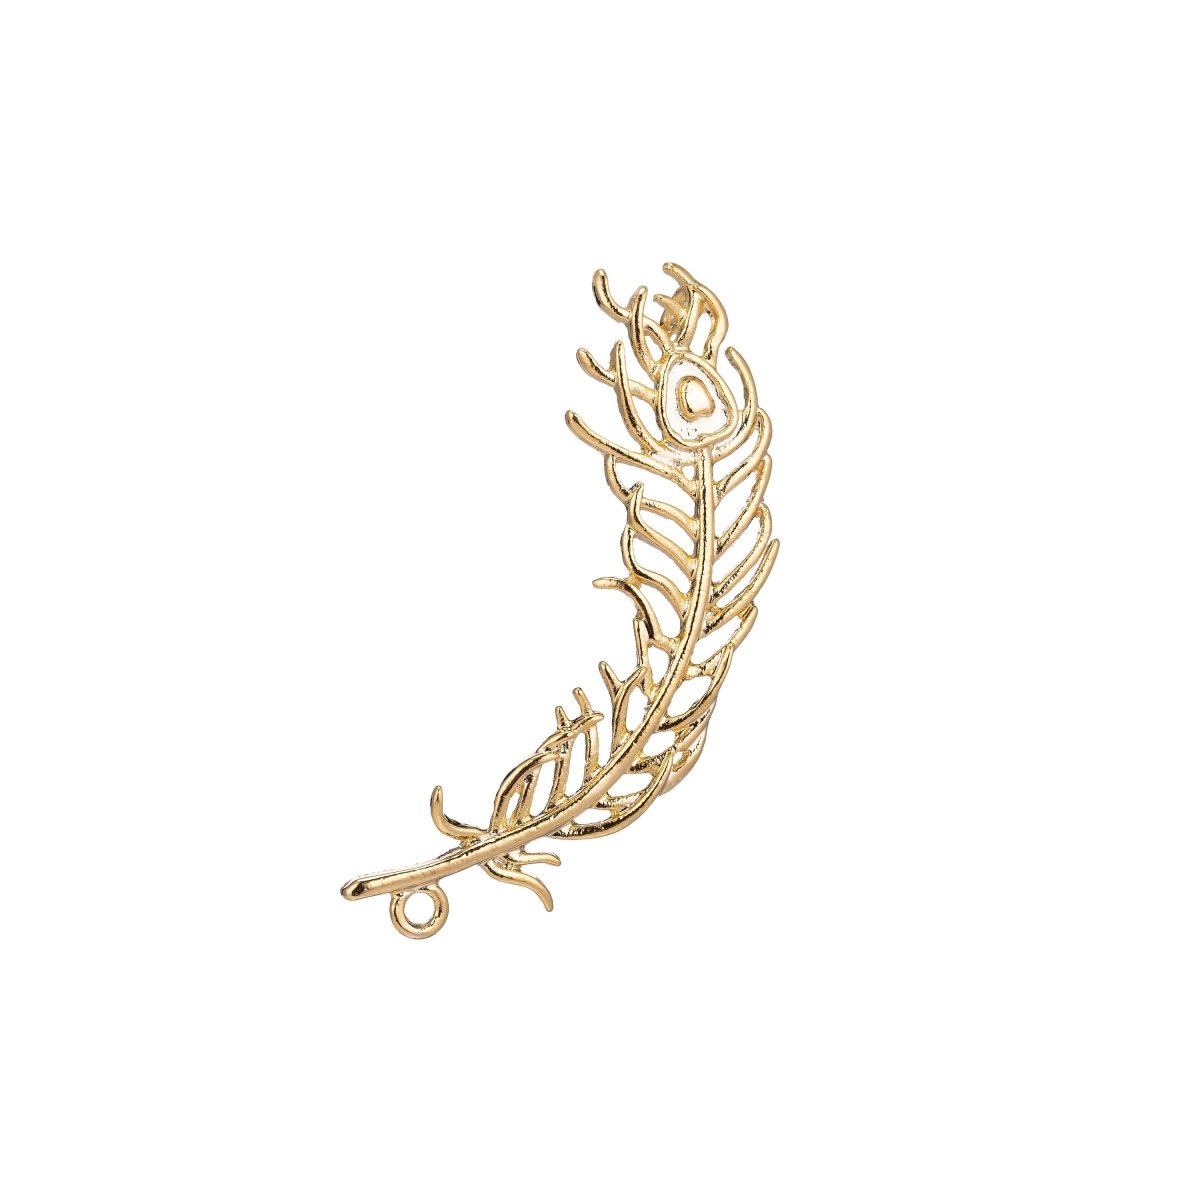 18K Gold Filled Peacock Feather Charm Connector for Necklace Bracelet Jewelry Making Supplies F-762 - DLUXCA